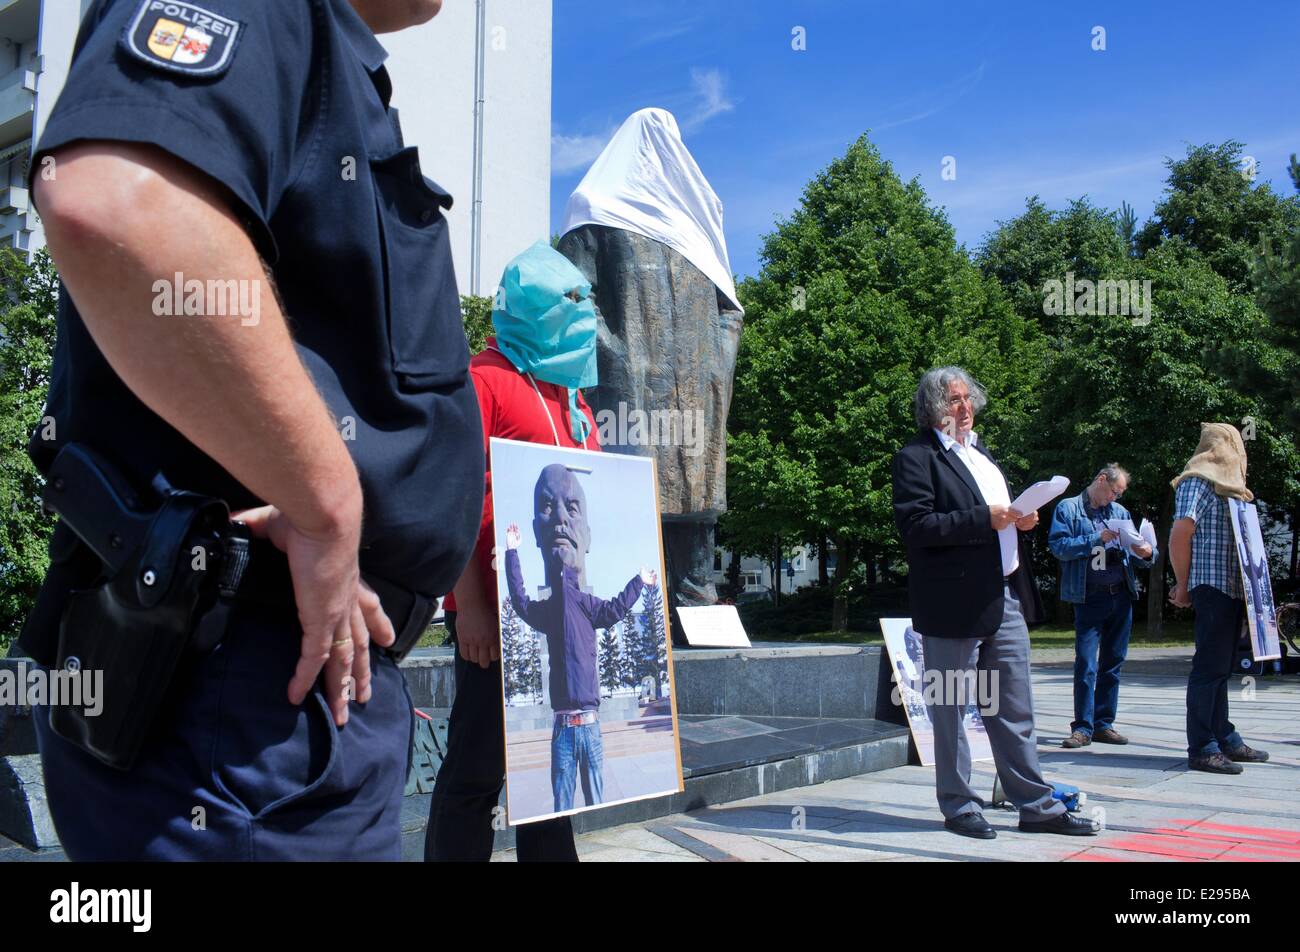 Schwerin, Germany. 17th June, 2014. The partially covered Lenin memorial is pictured behind former East German regime critic, Alexander Bauersfeld, in Schwerin, Germany, 17 June 2014. The action is meant to commemorate the workers' uprising on 17 June 1953 and the victims of the communist dictatorship in East Germany. 66 year old Bauersfeld is demanding that the bronze statue be taken down in the Grosser Dreesch neighborhood. Photo: JENS BUETTNER/dpa/Alamy Live News Stock Photo